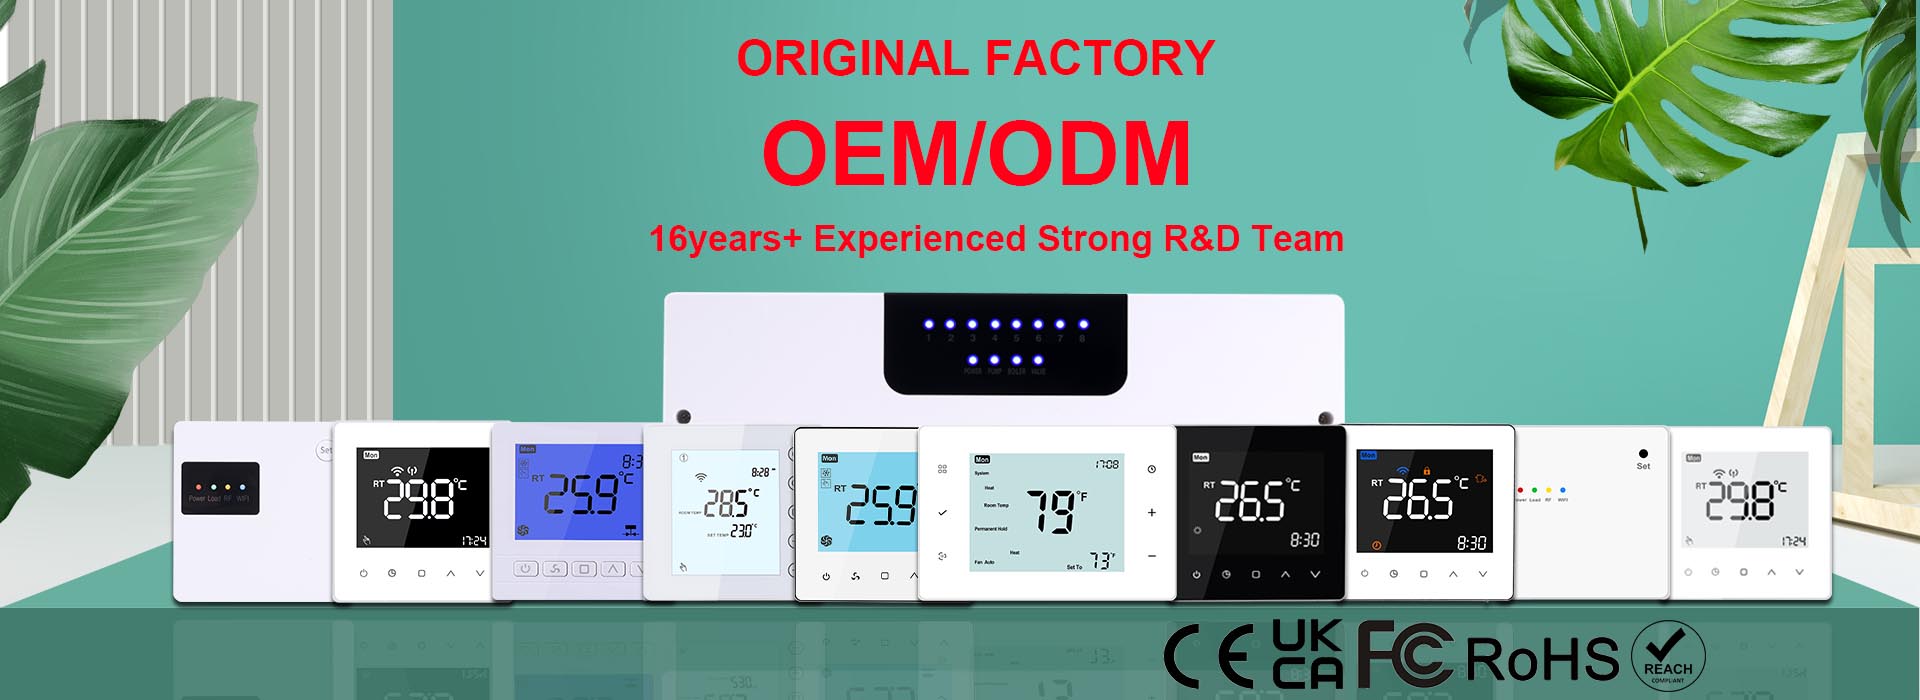 ODM/ODM thermostats manuafacture in China.With rich R&D developing experiences.We provide stable.competitive smart themrostats for customers.